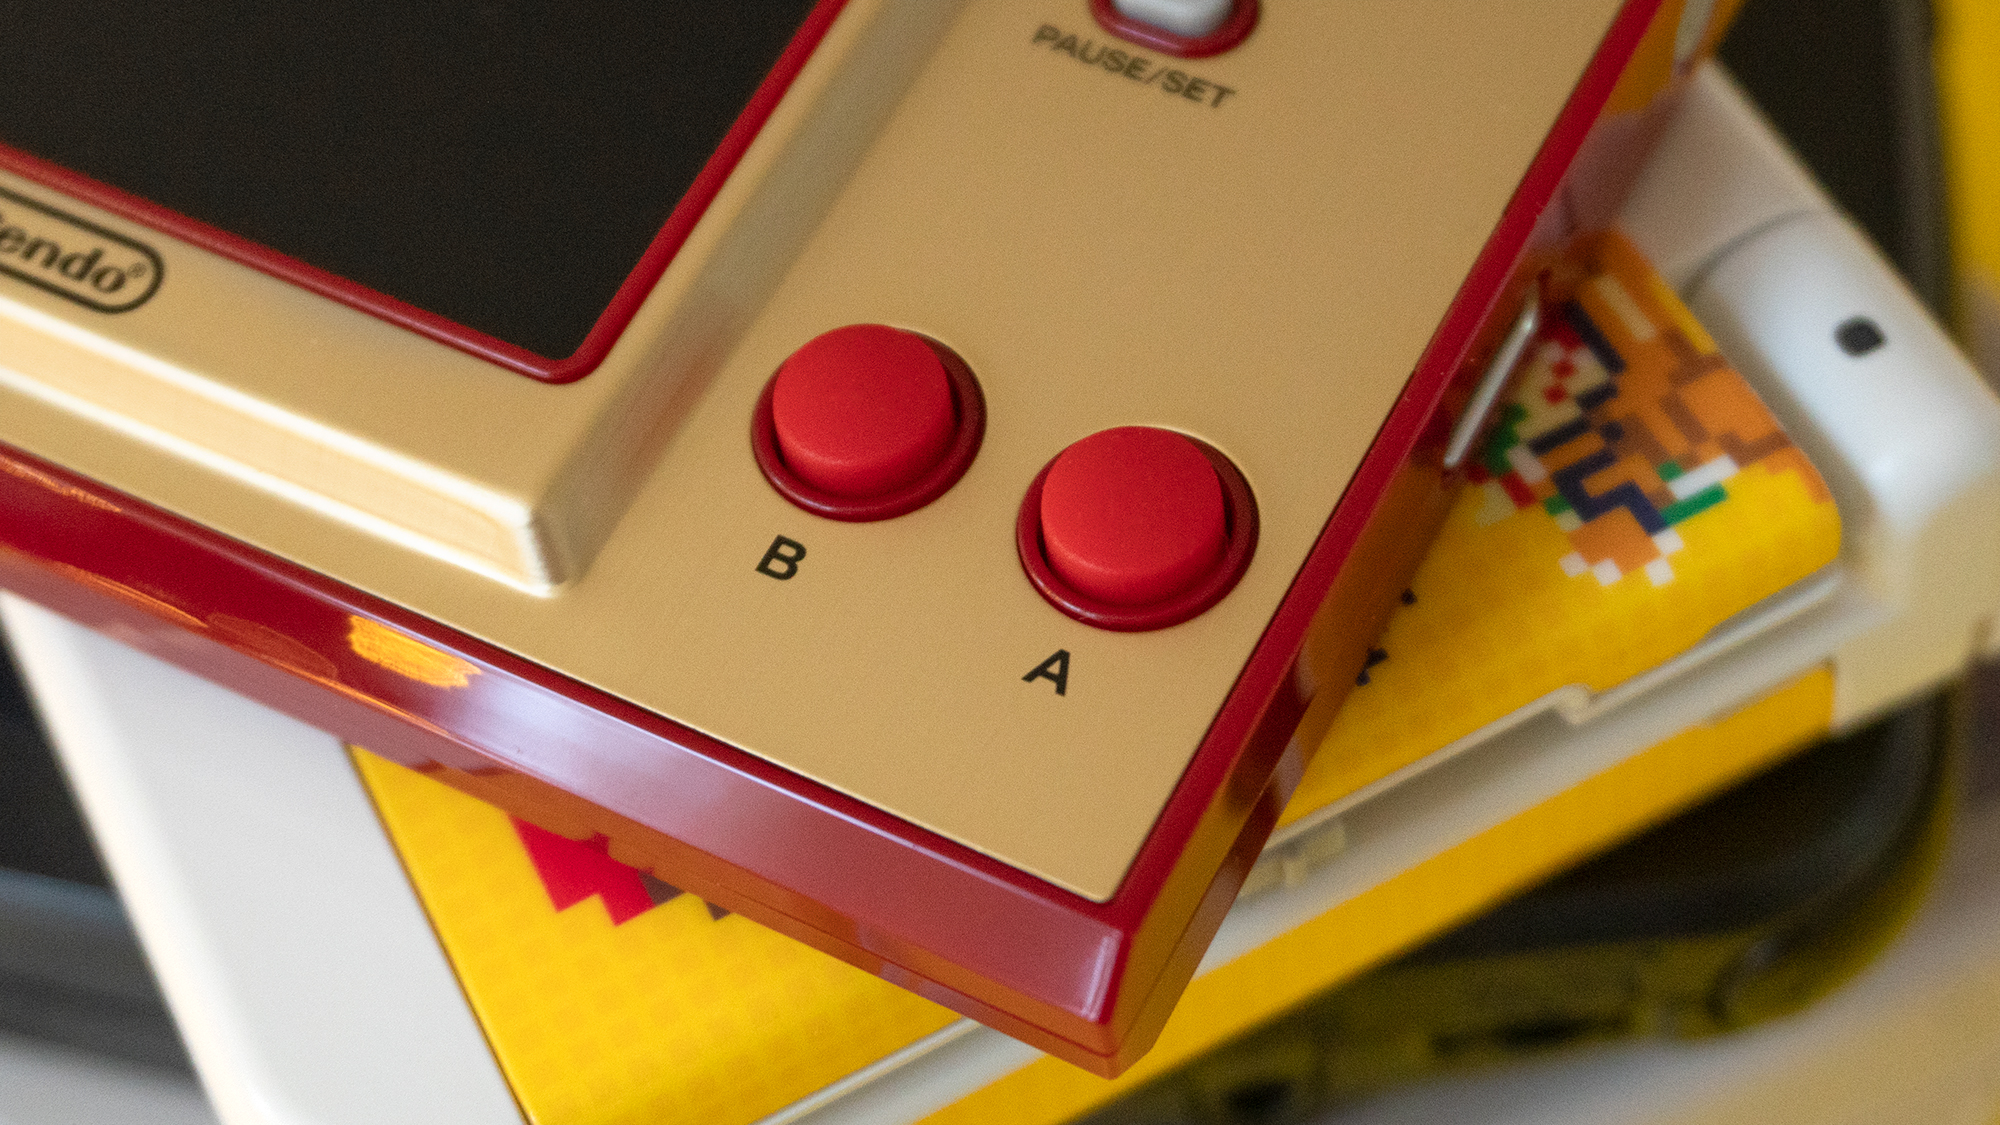 Rubber action buttons? That's how the original Game & Watch device's rolled, and these feel just fine, even if they're not smooth plastic. (Photo: Andrew Liszewski - Gizmodo)